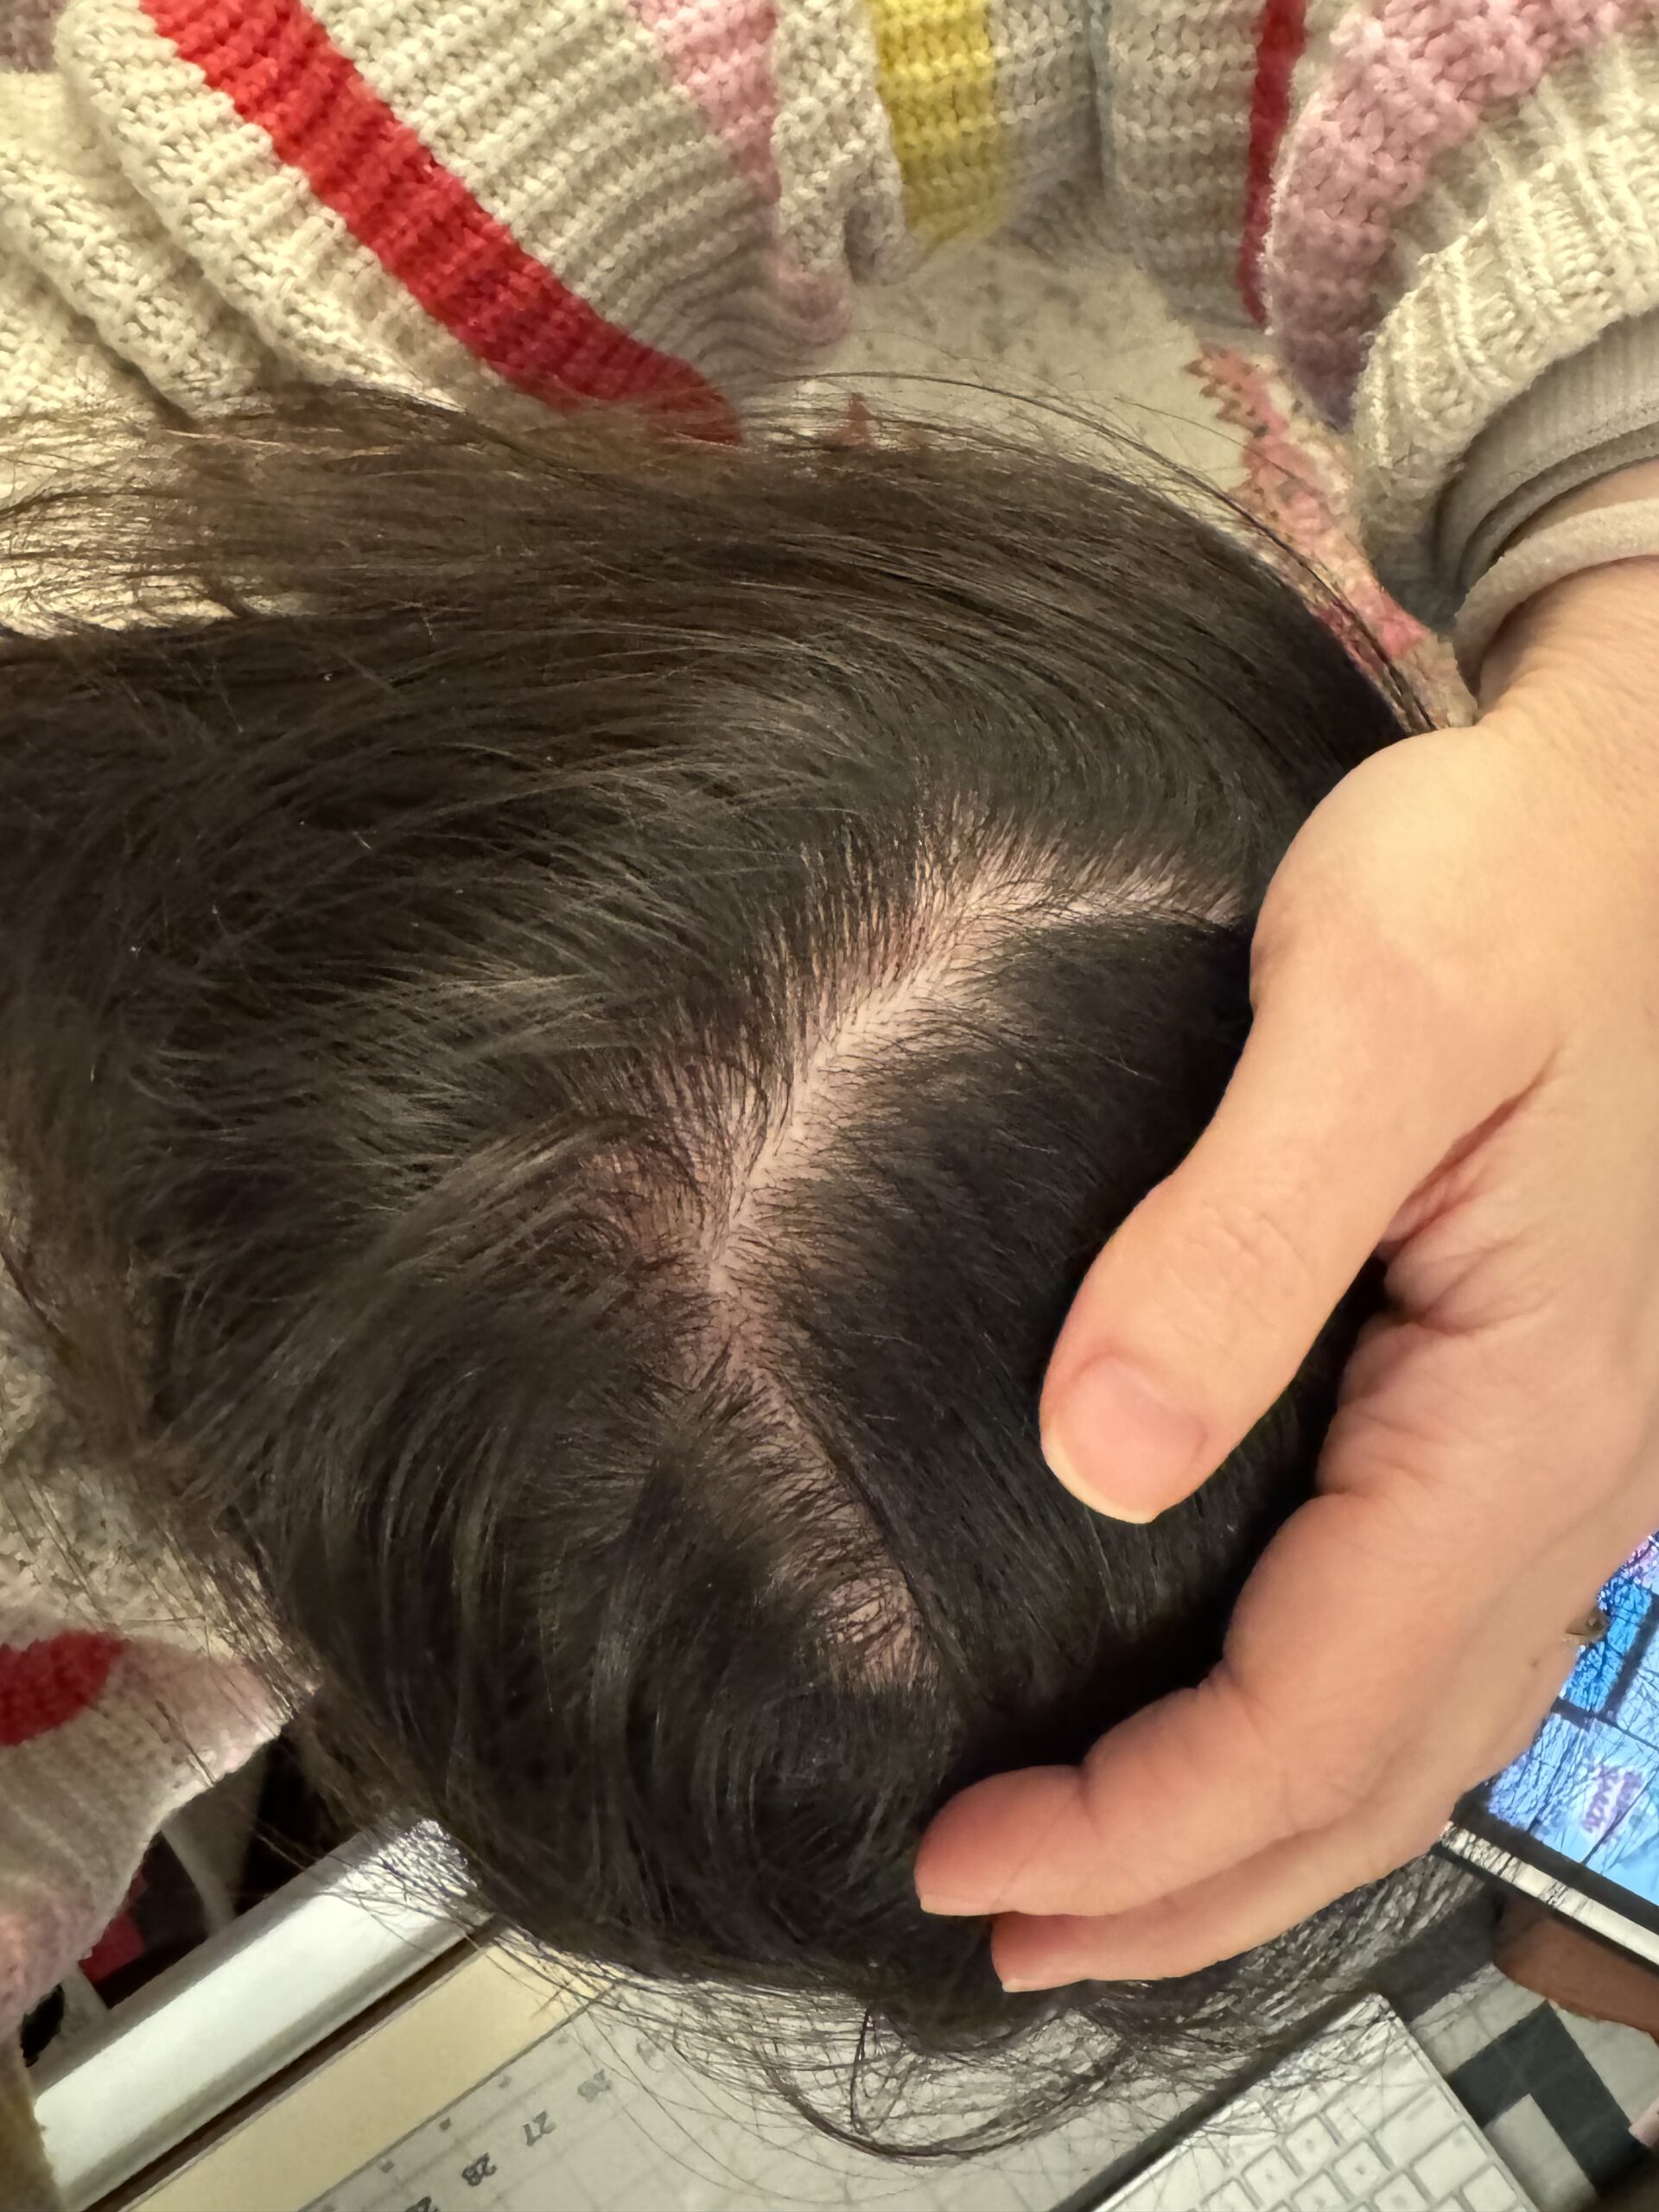 Close-up of a person's head showing a parting in dark hair with visible scalp, hand adjusting the hair, and a blurred background including a smartphone.